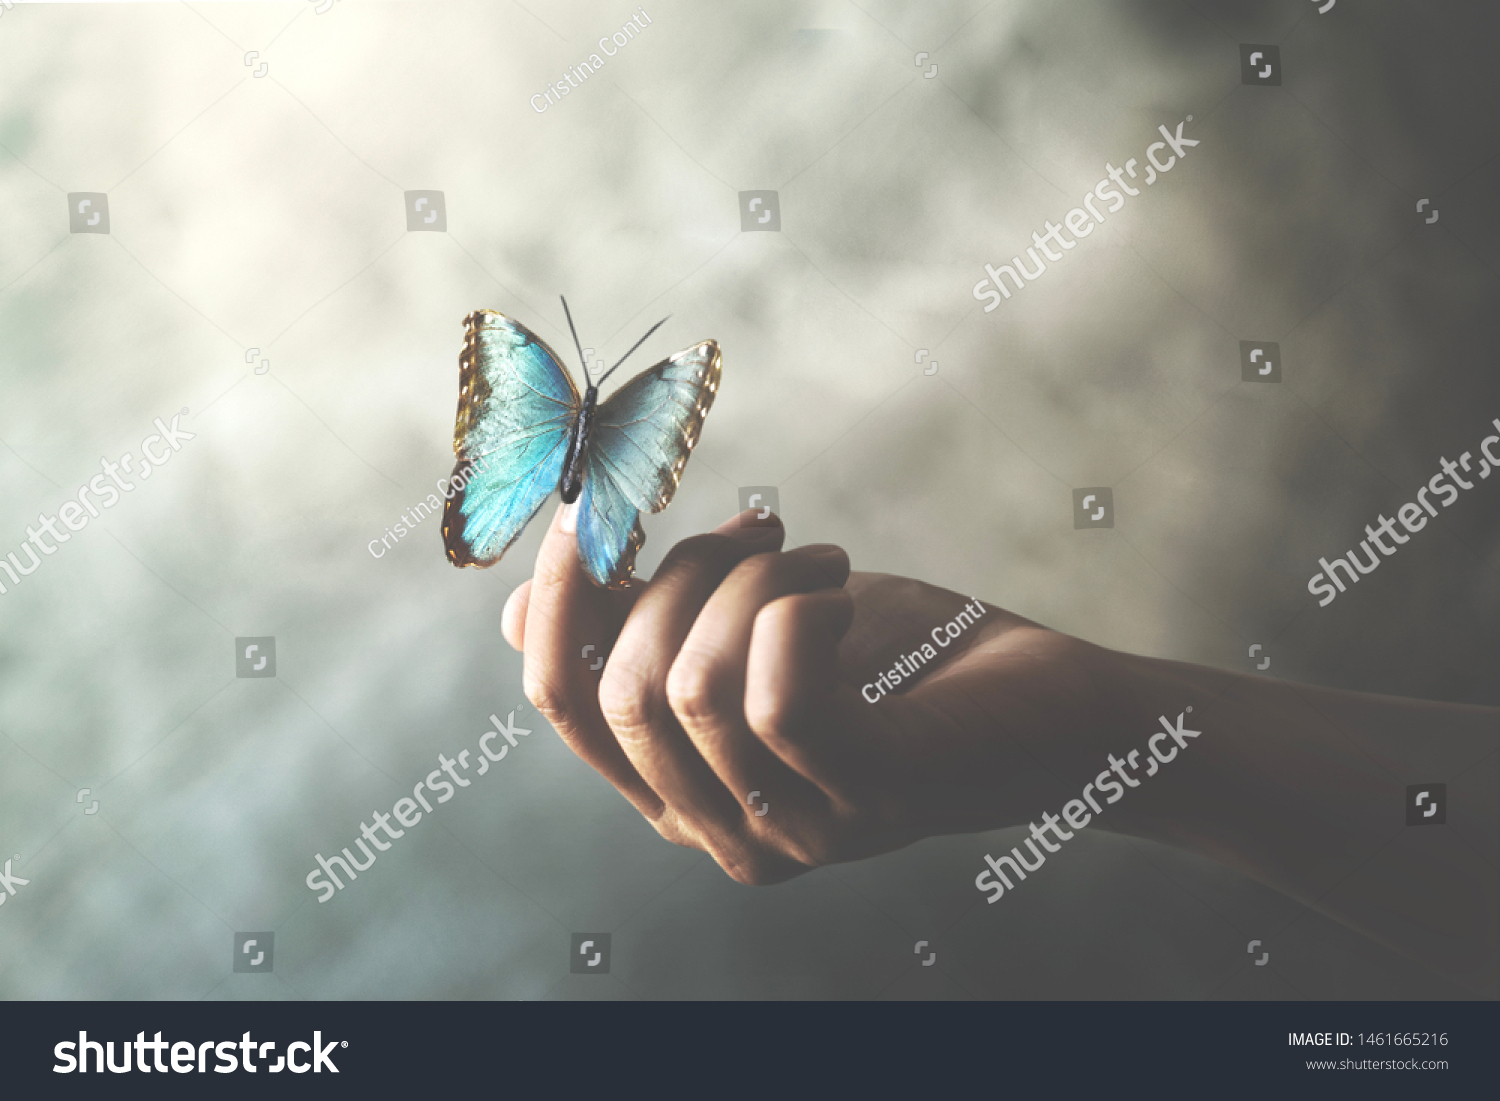 a butterfly leans on a woman's hand #1461665216